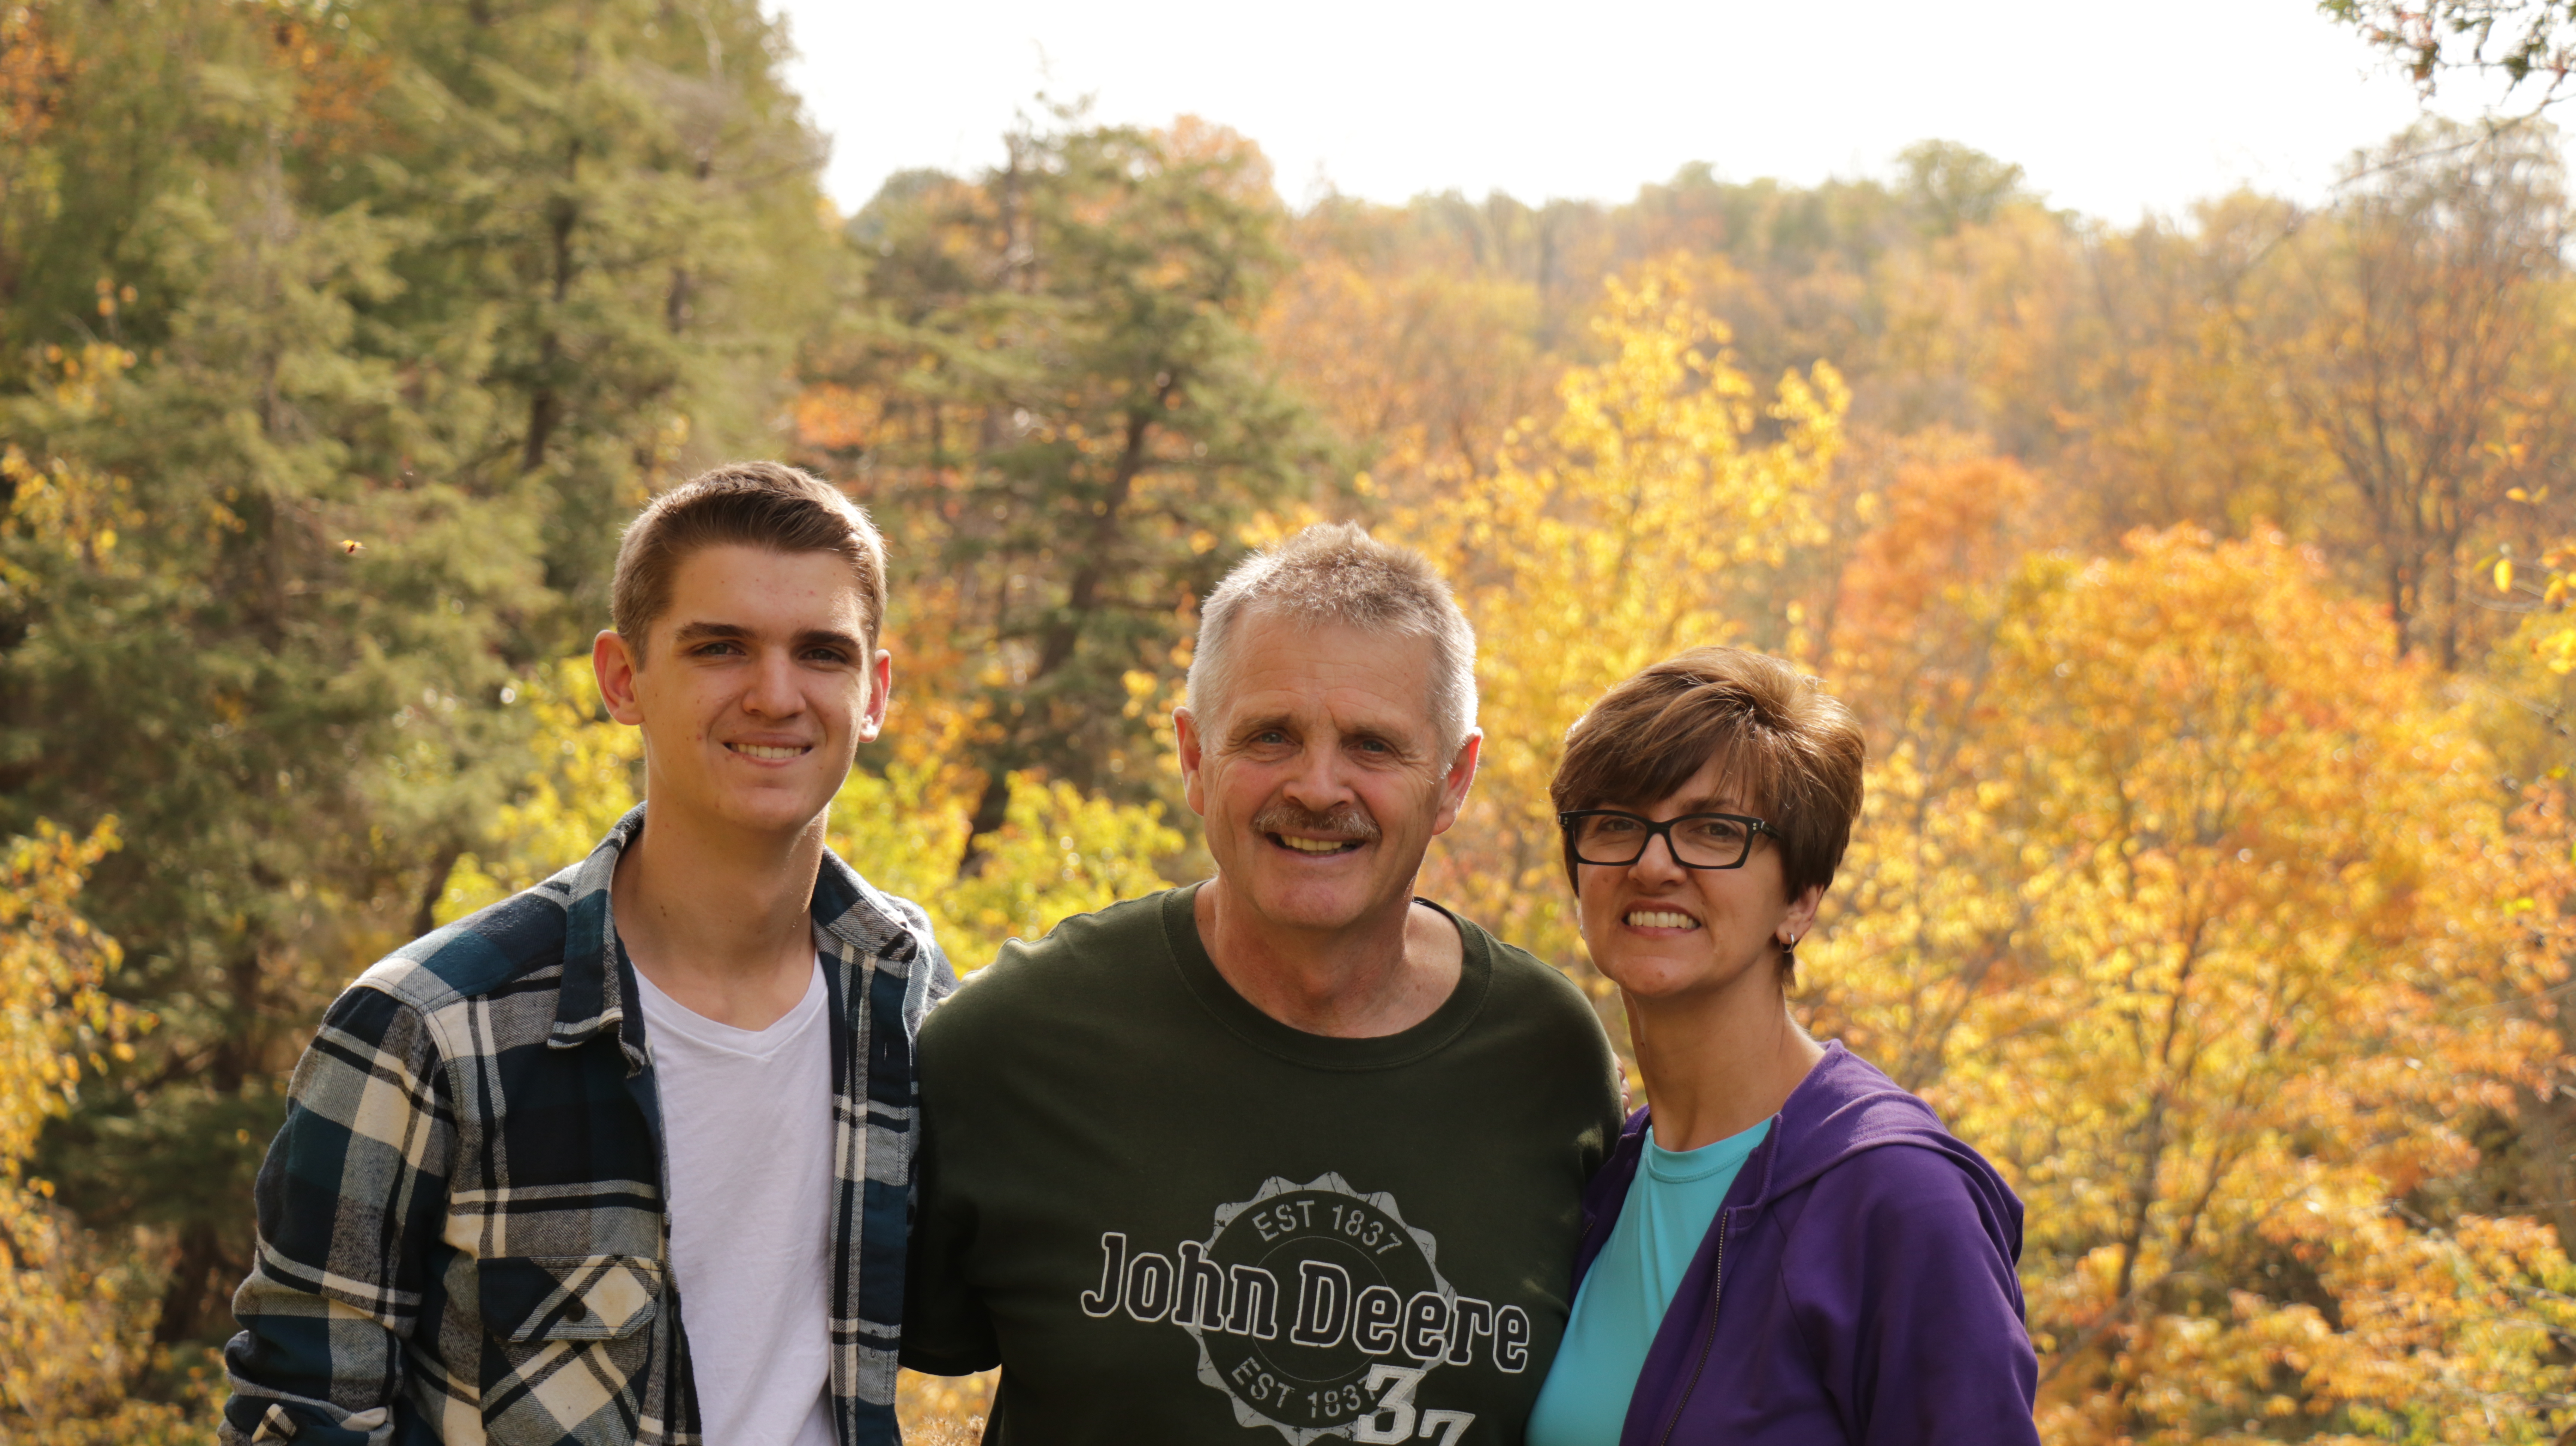 A young man, a middle-aged man and middle-aged woman smile at camera with a forest behind them.